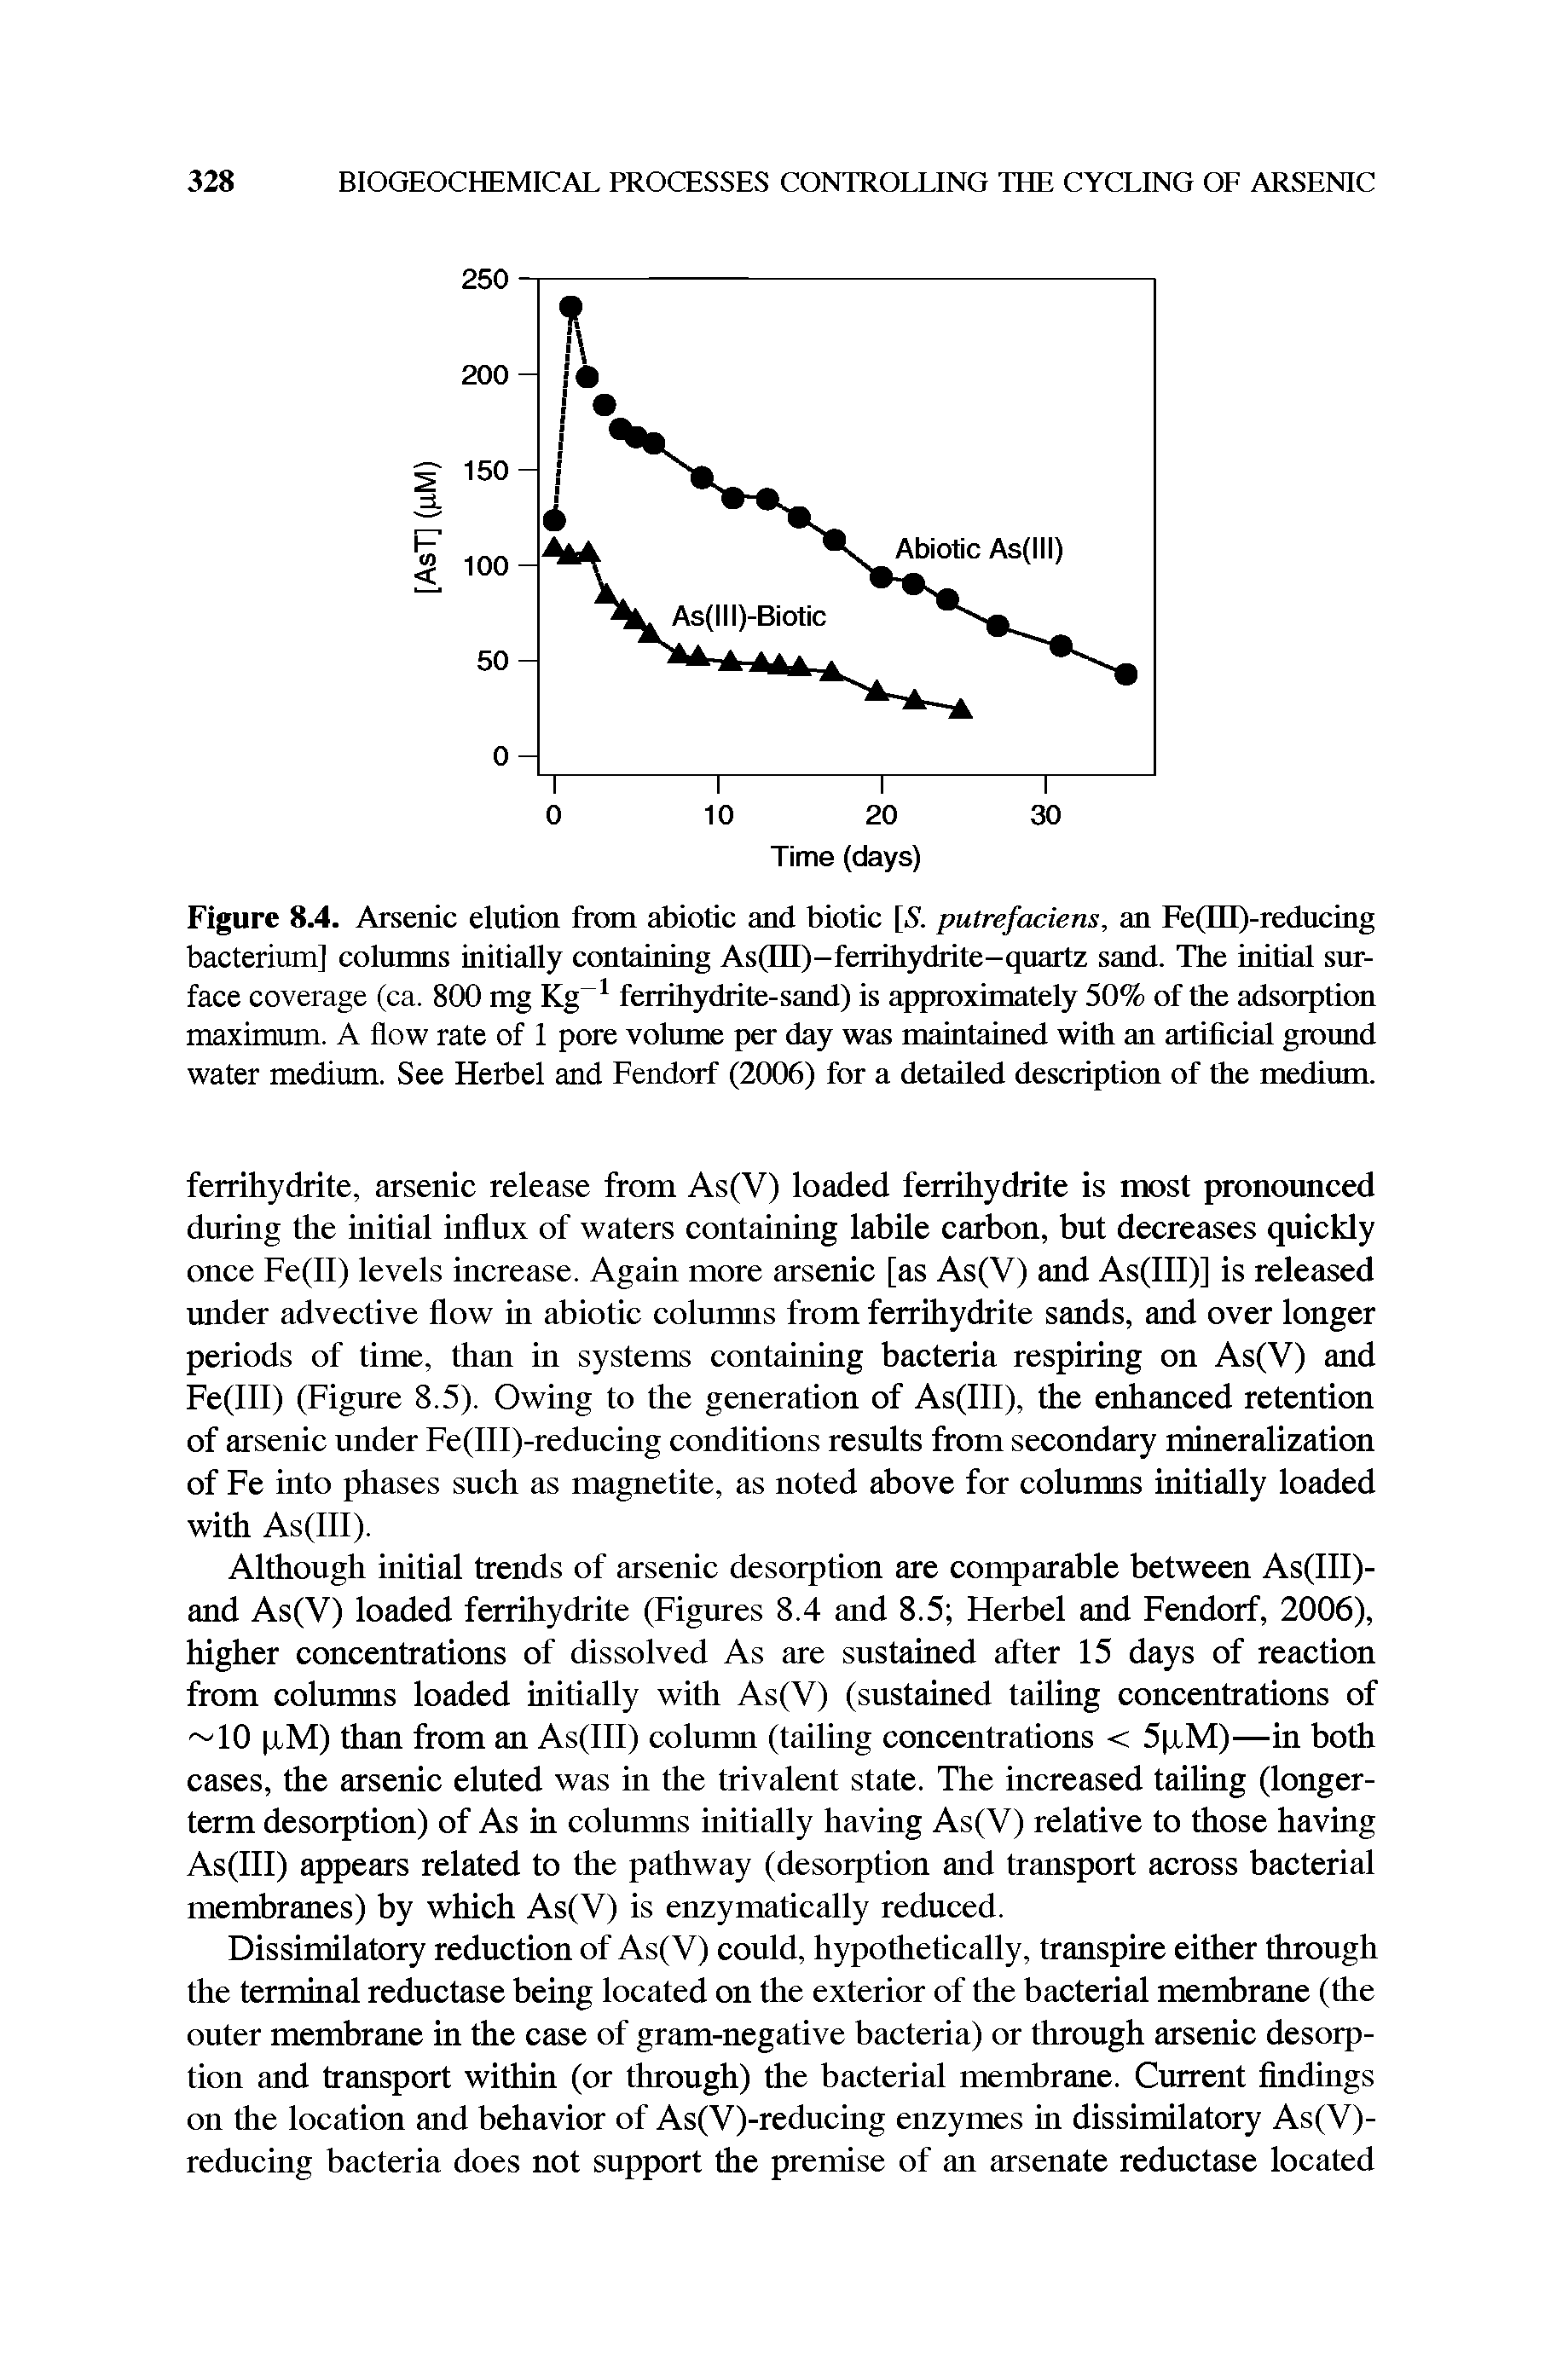 Figure 8.4. Arsenic elution from abiotic and biotic. S. putrefaciens, an Fe(IIl)-reducing bacterium] columns initially containing As(in)-ferrihydrite-quartz sand. The initial surface coverage (ca. 800 mg Kg ferrihydrite-sand) is approximately 50% of the adsorption maximum. A flow rate of 1 pore volume per day was maintained with an artificial ground water medium. See Herbel and Fendorf (2006) for a detailed description of the medium.